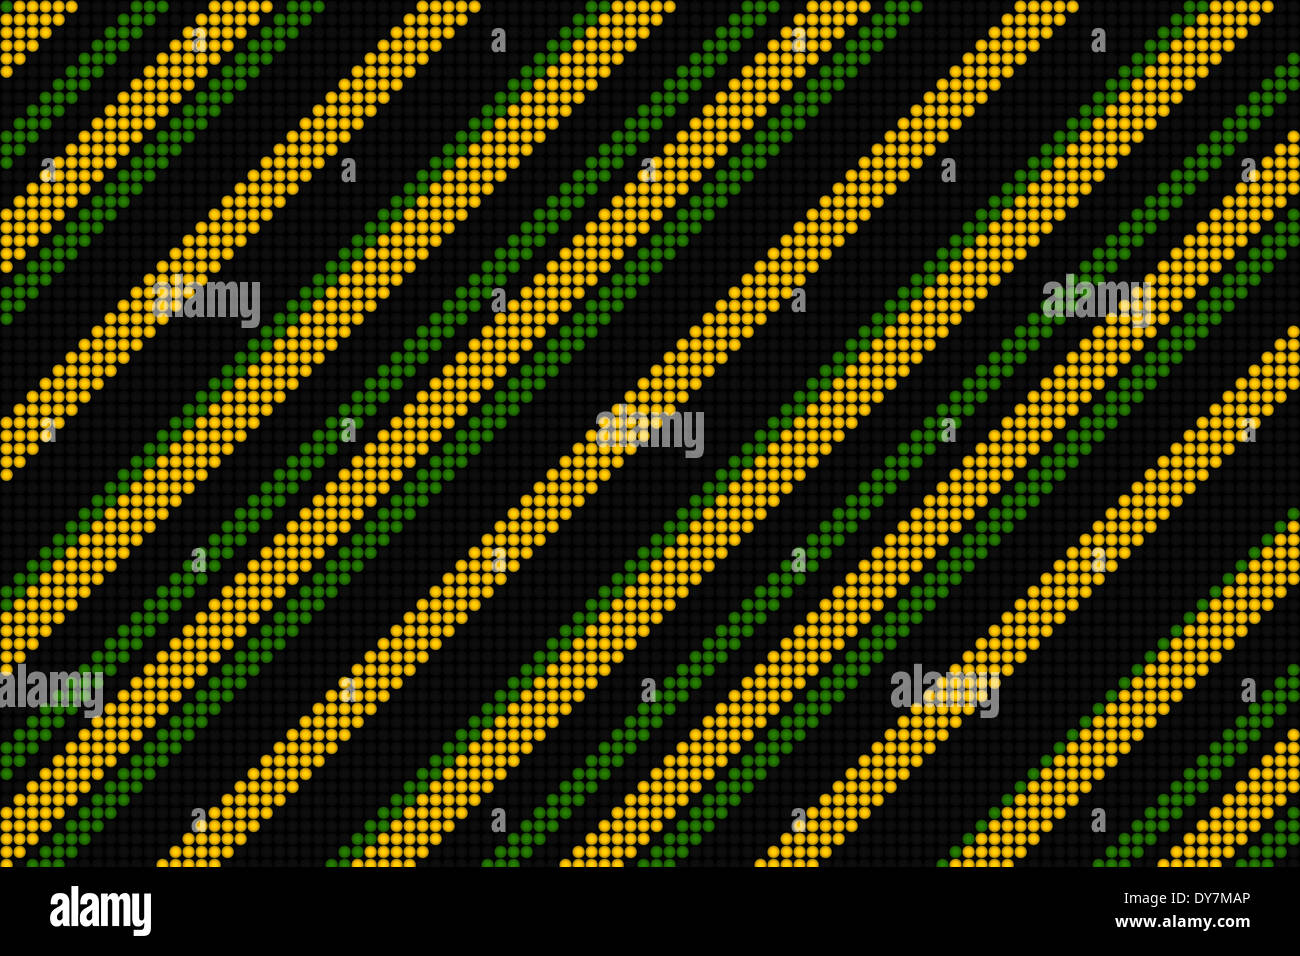 Cool linear pattern in black green and yellow Stock Photo